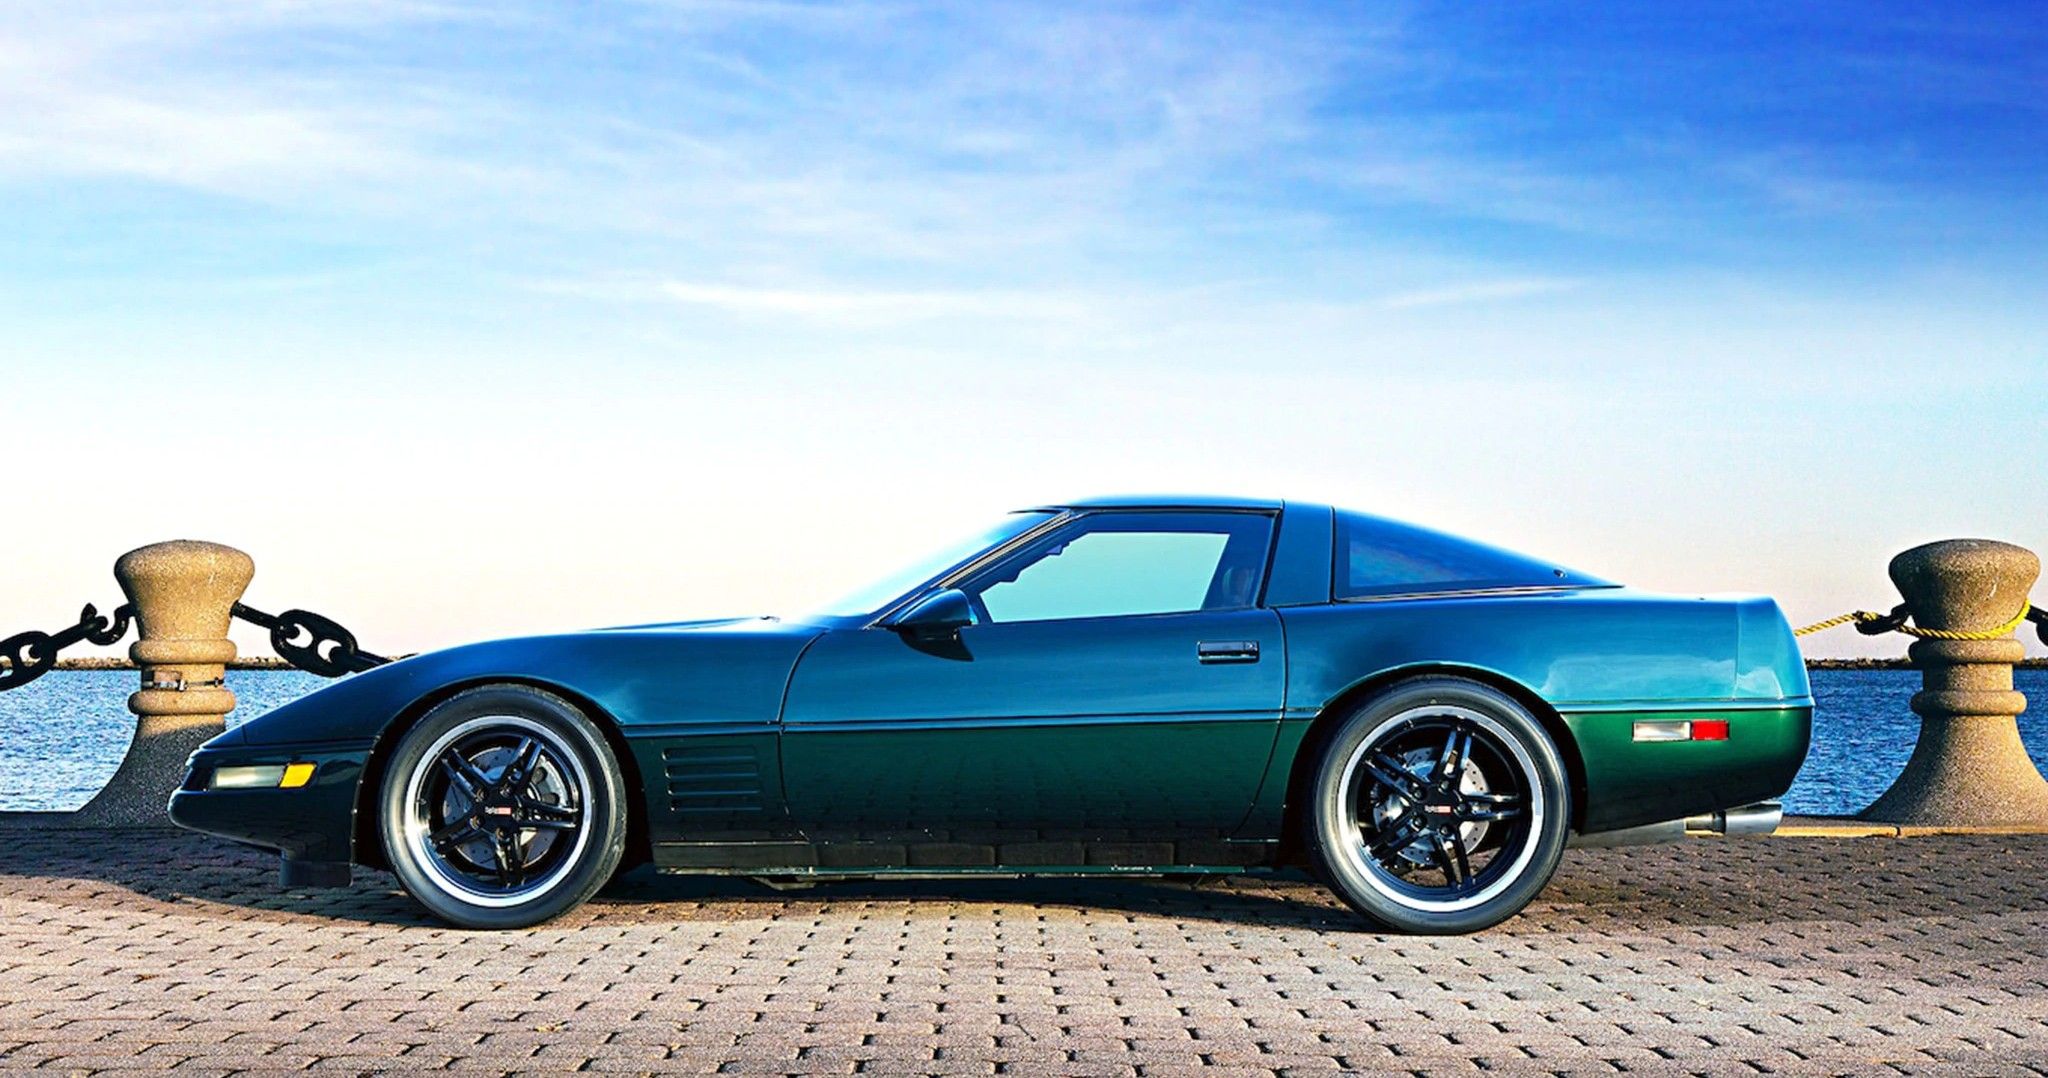 Here's What Makes The C4 Corvette A Practical Sports Car